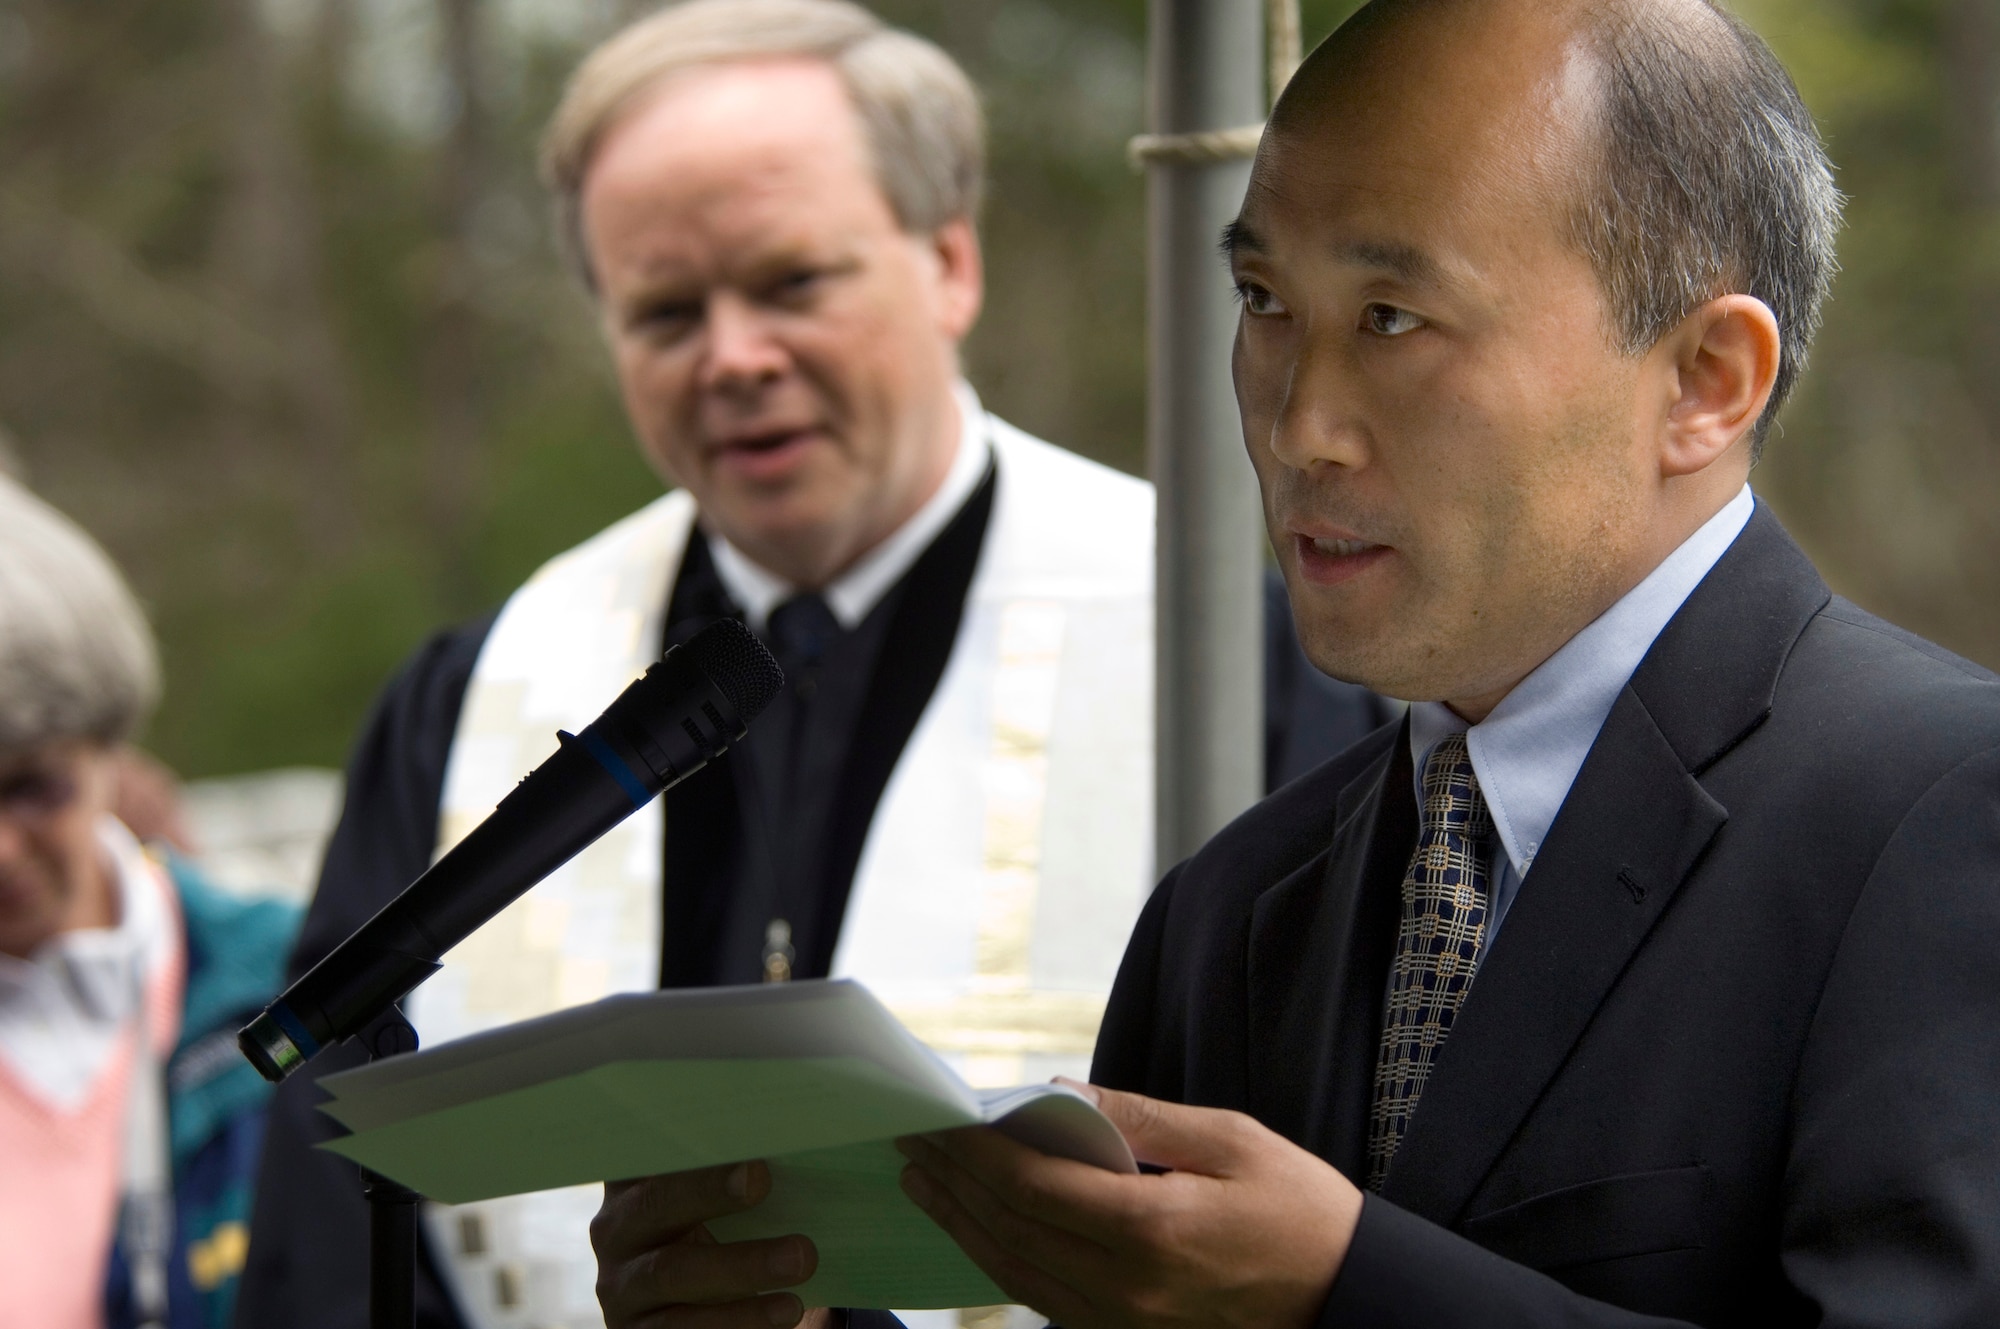 Jia Xiudong, representing the Chinese Embassy in Washington, D.C., reads a letter from Huang Renzhun during memorial services for 2nd Lt. Robert Hoyle Upchurch on Saturday, April 8, 2006.  Lieutenant Upchurch was a member of the famed Flying Tigers during World War II and was listed as missing in action until his remains were identified last May by the Joint POW/MIA Accounting Command.  In his letter, Mr. Huang tells how, as a young boy, he remembered the body of an American pilot being recovered and given a ceremonial burial in the village of Guidong, Hunan Province.  The villagers maintained the burial site more than 60 years until Lieutenant Upchurch's remains were returned to the U.S.  (U.S. Air Force photo/Master Sgt. Jack Braden)